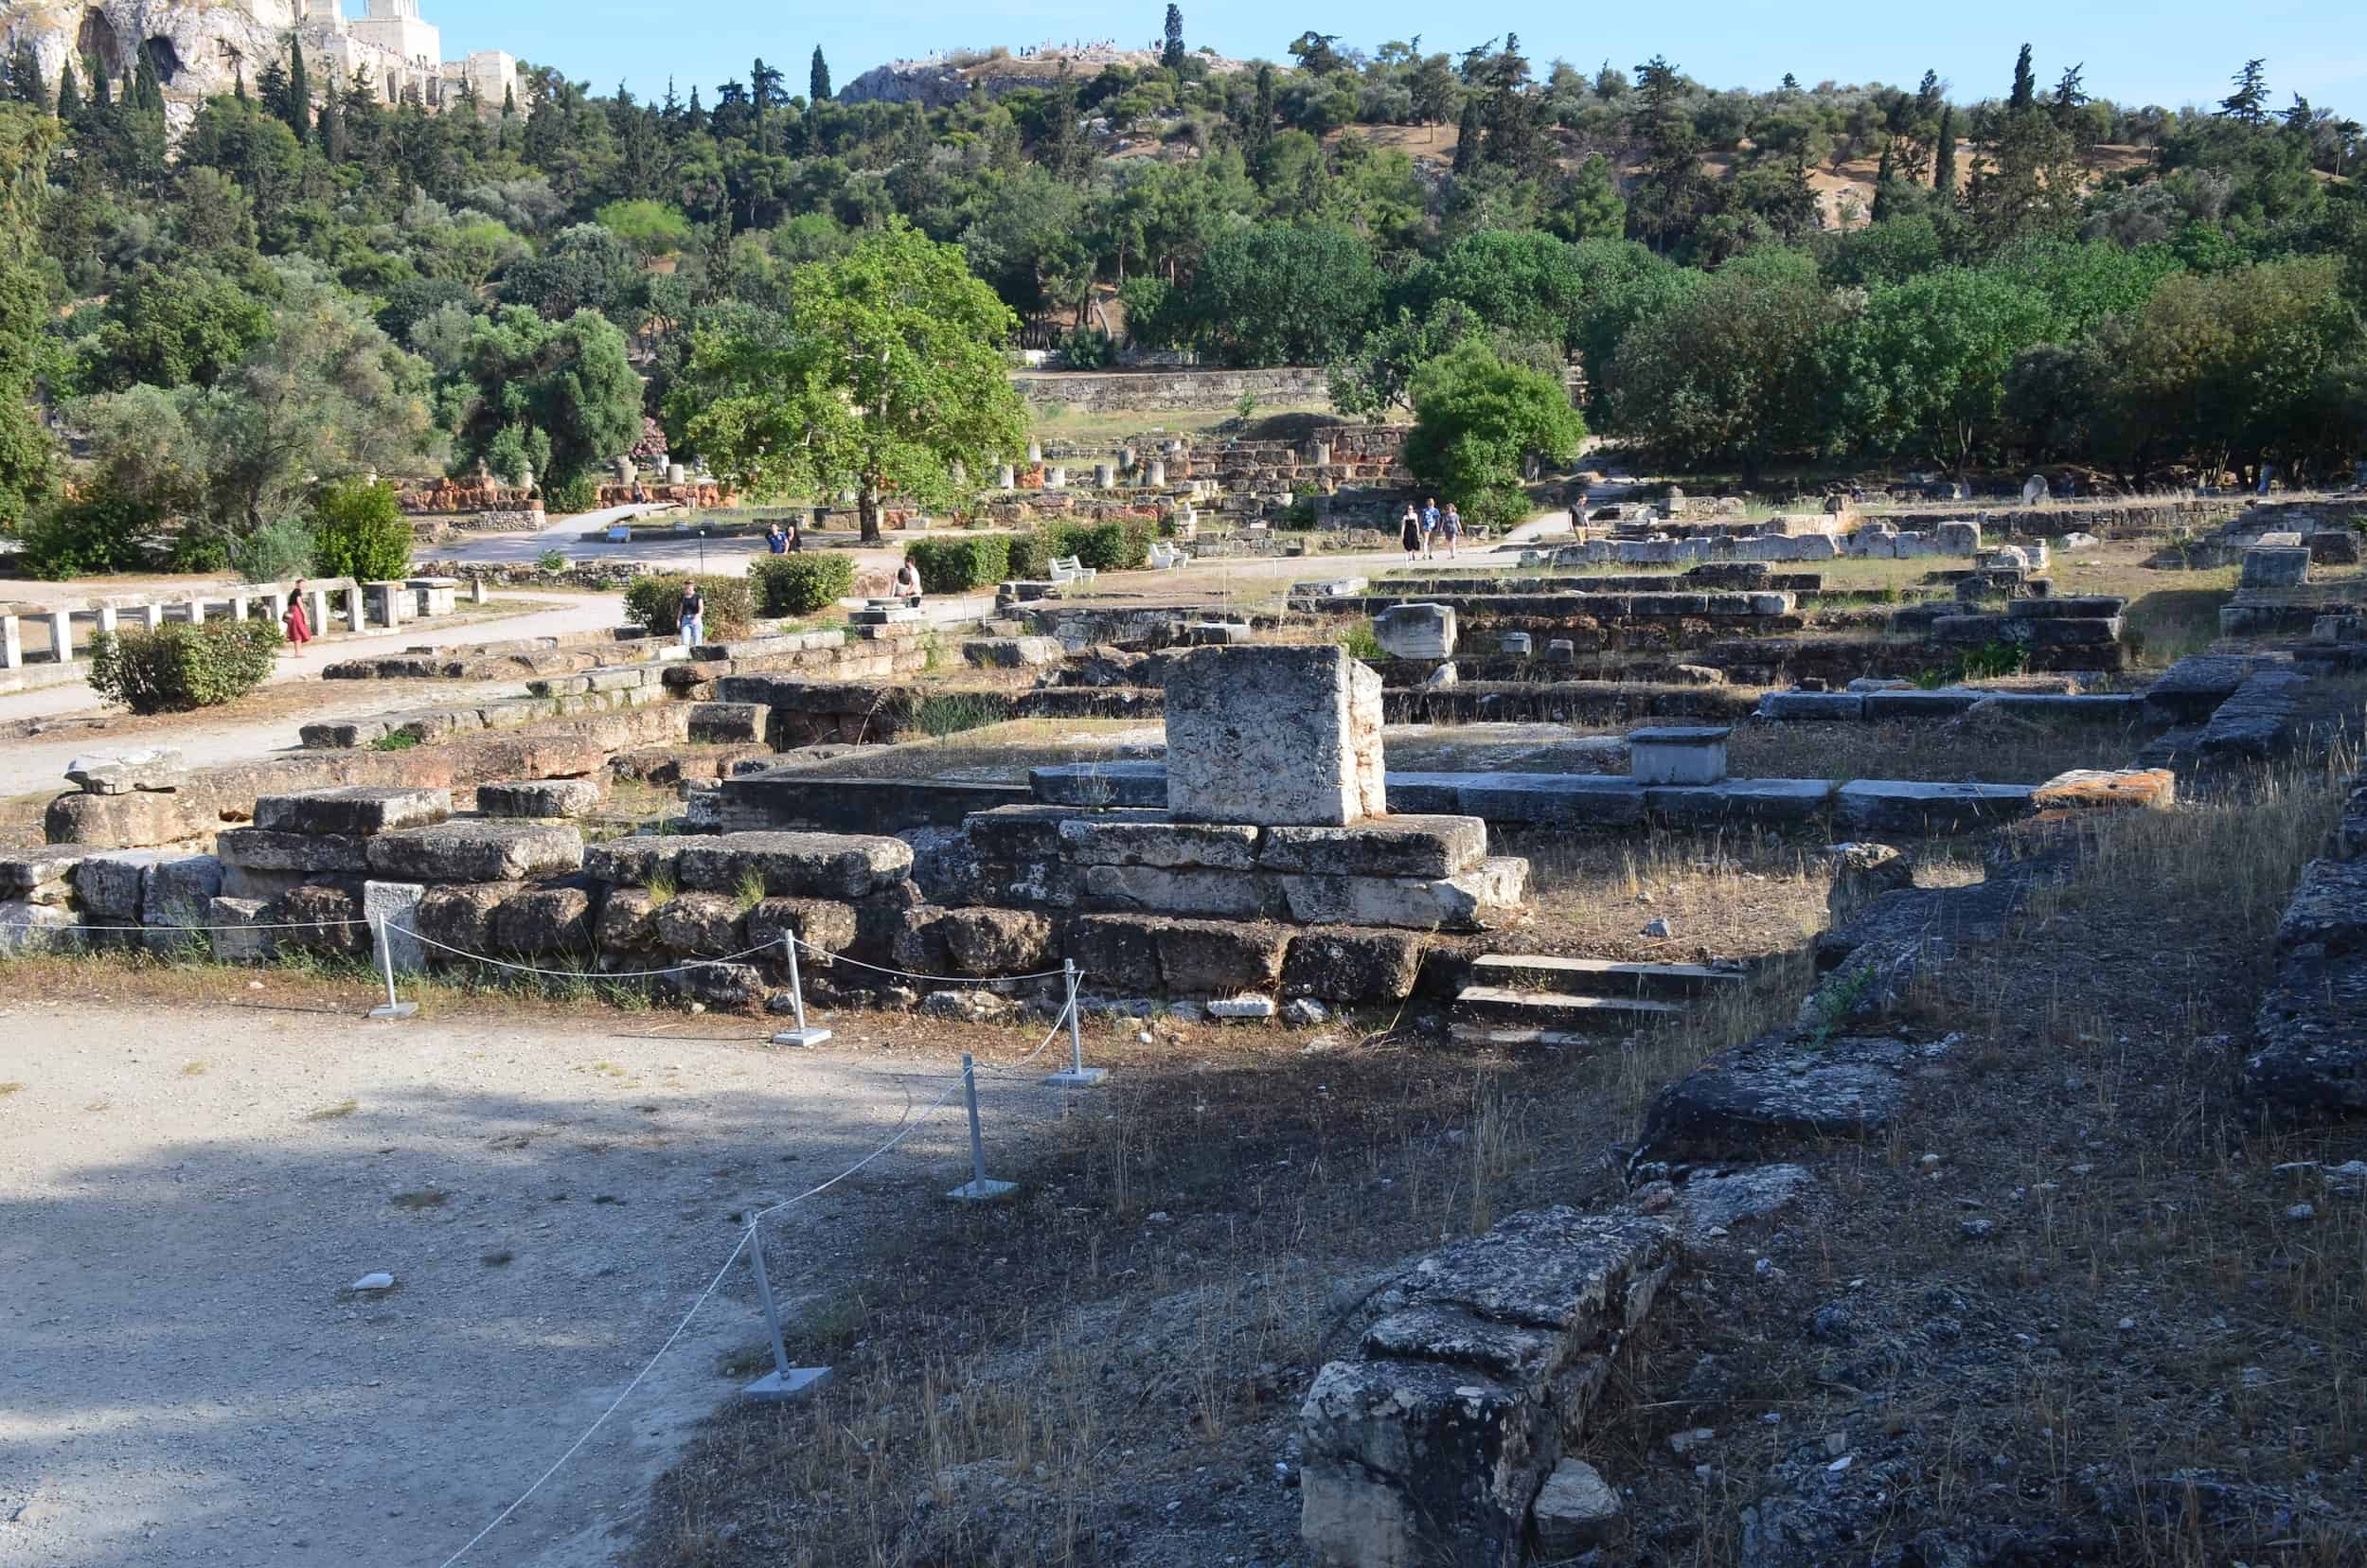 West side of the Ancient Agora of Athens